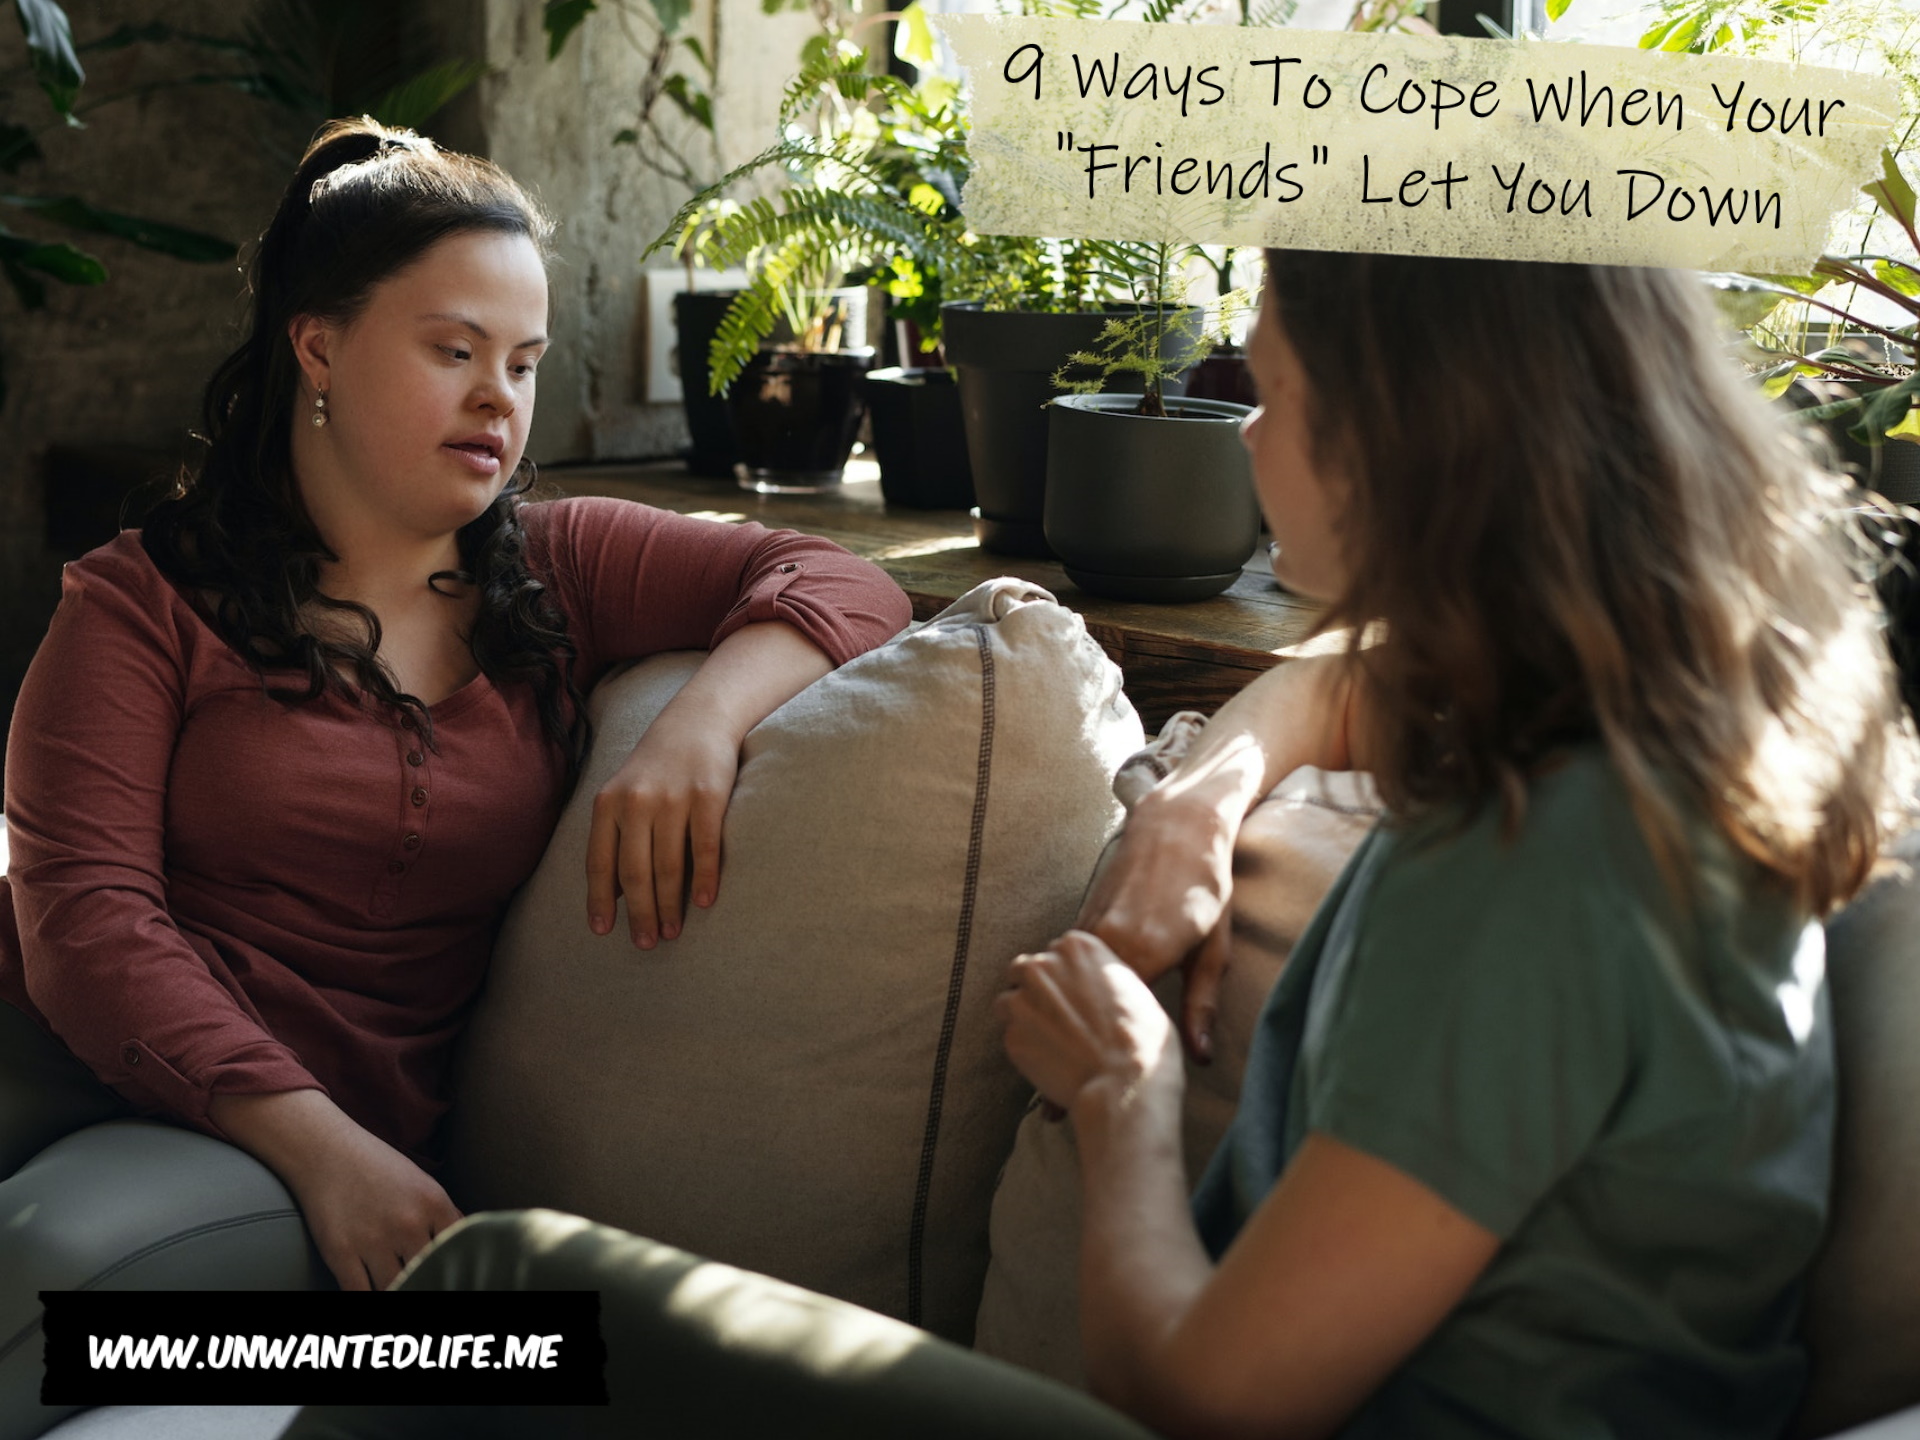 A woman with Down's syndrome talking to their female friend on the sofa to represent the topic of the article - 9 Ways To Cope When Your Friends Let You Down